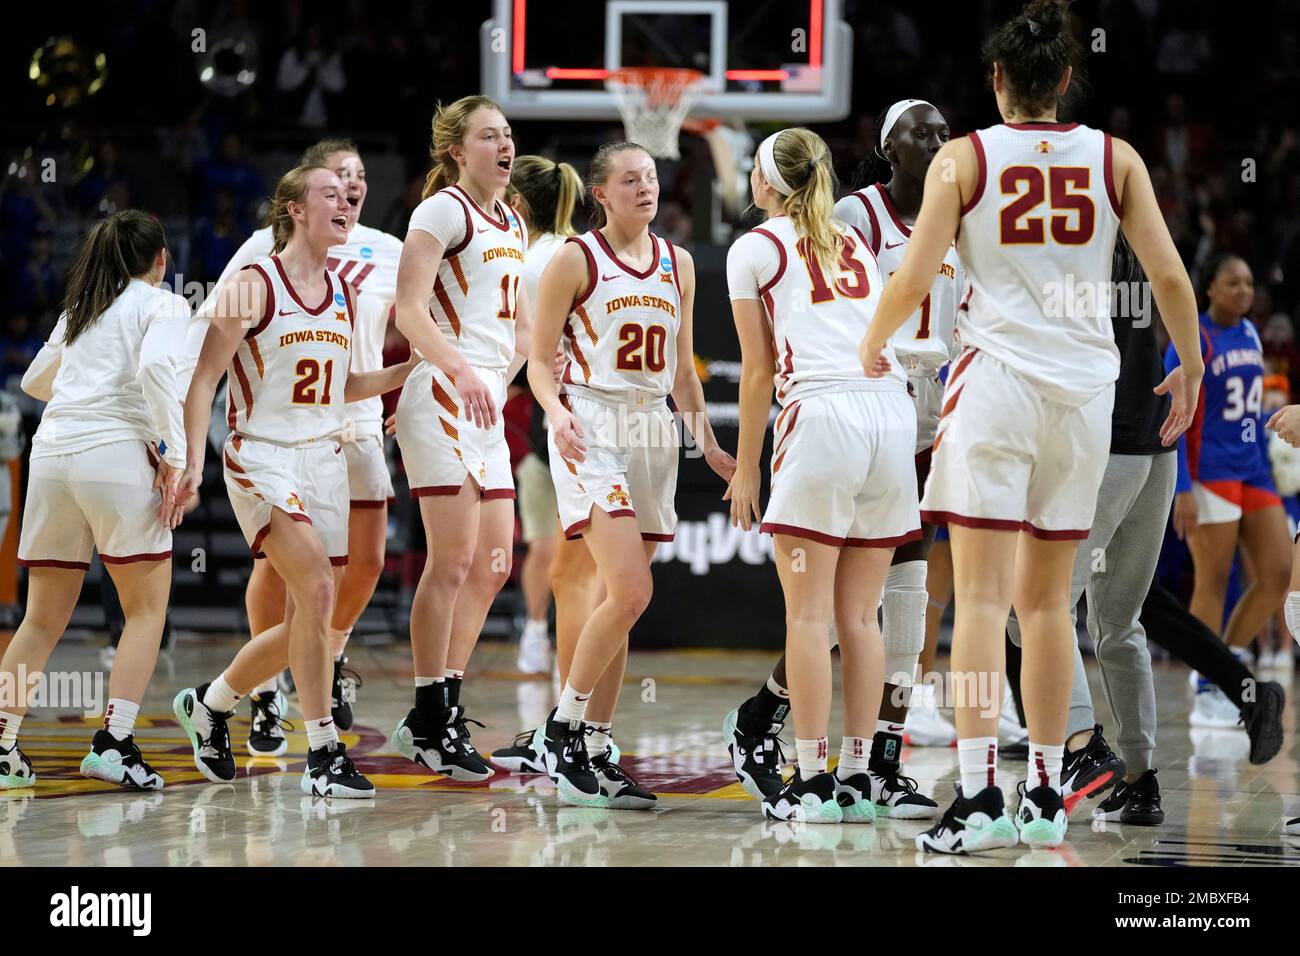 Iowa State players celebrate at the end of a first-round game against Texas-Arlington in the NCAA women's college basketball tournament, Friday, March 18, 2022, in Ames, Iowa. Iowa State won 78-71. (AP Photo/Charlie Neibergall) Stockfoto